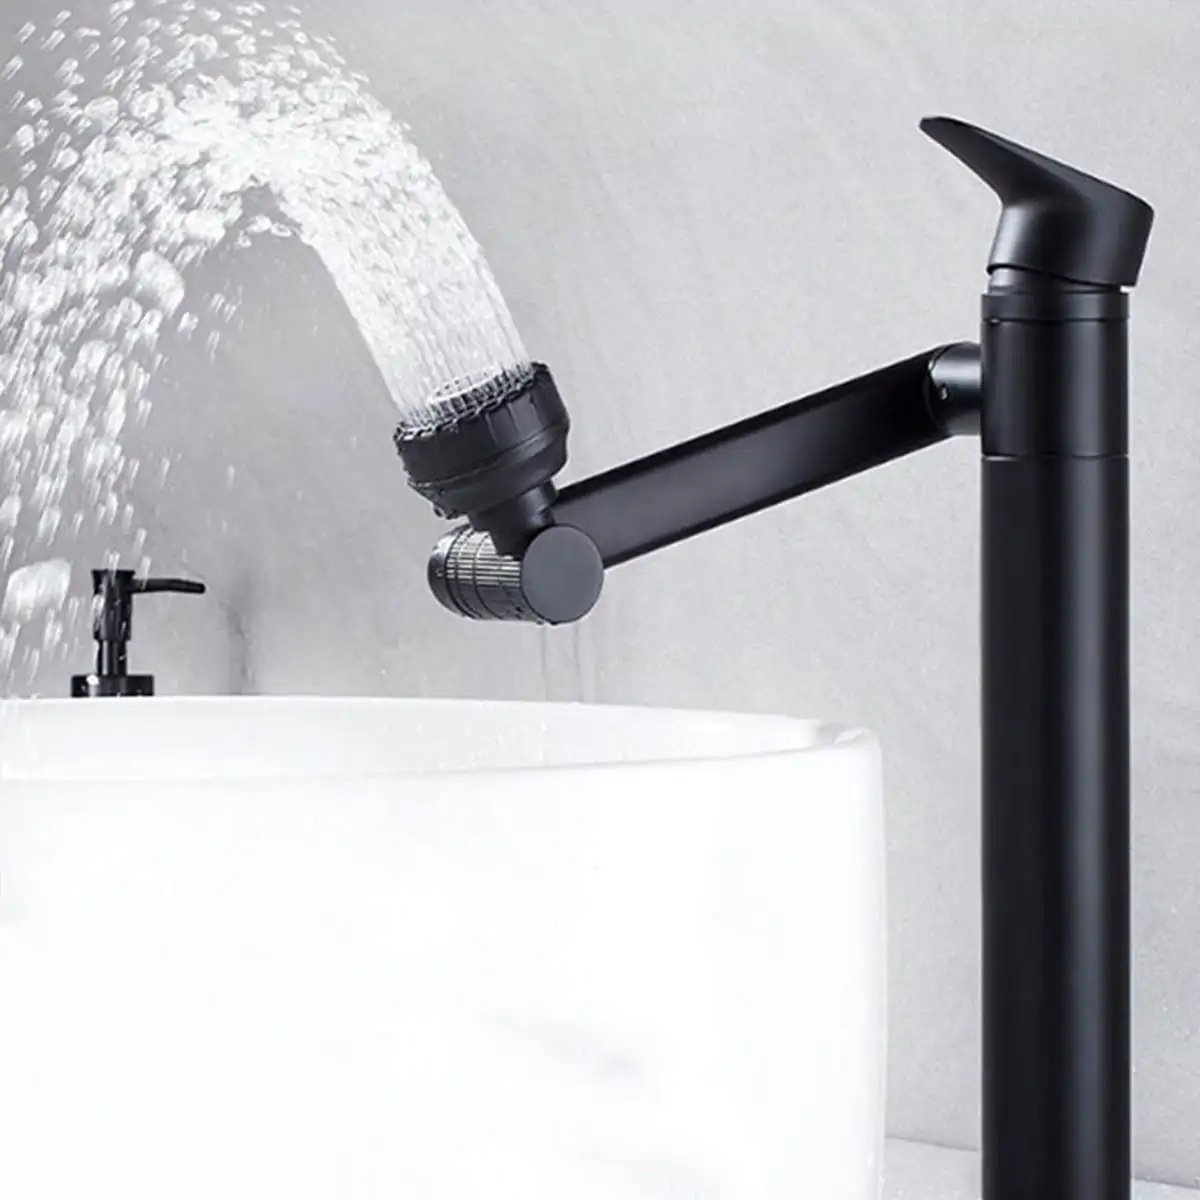 

Stainless Steel Black Kitchen Faucet Brushed Process Swivel Basin Faucet 360 Degree Rotation Hot & Cold Water Mixers Tap